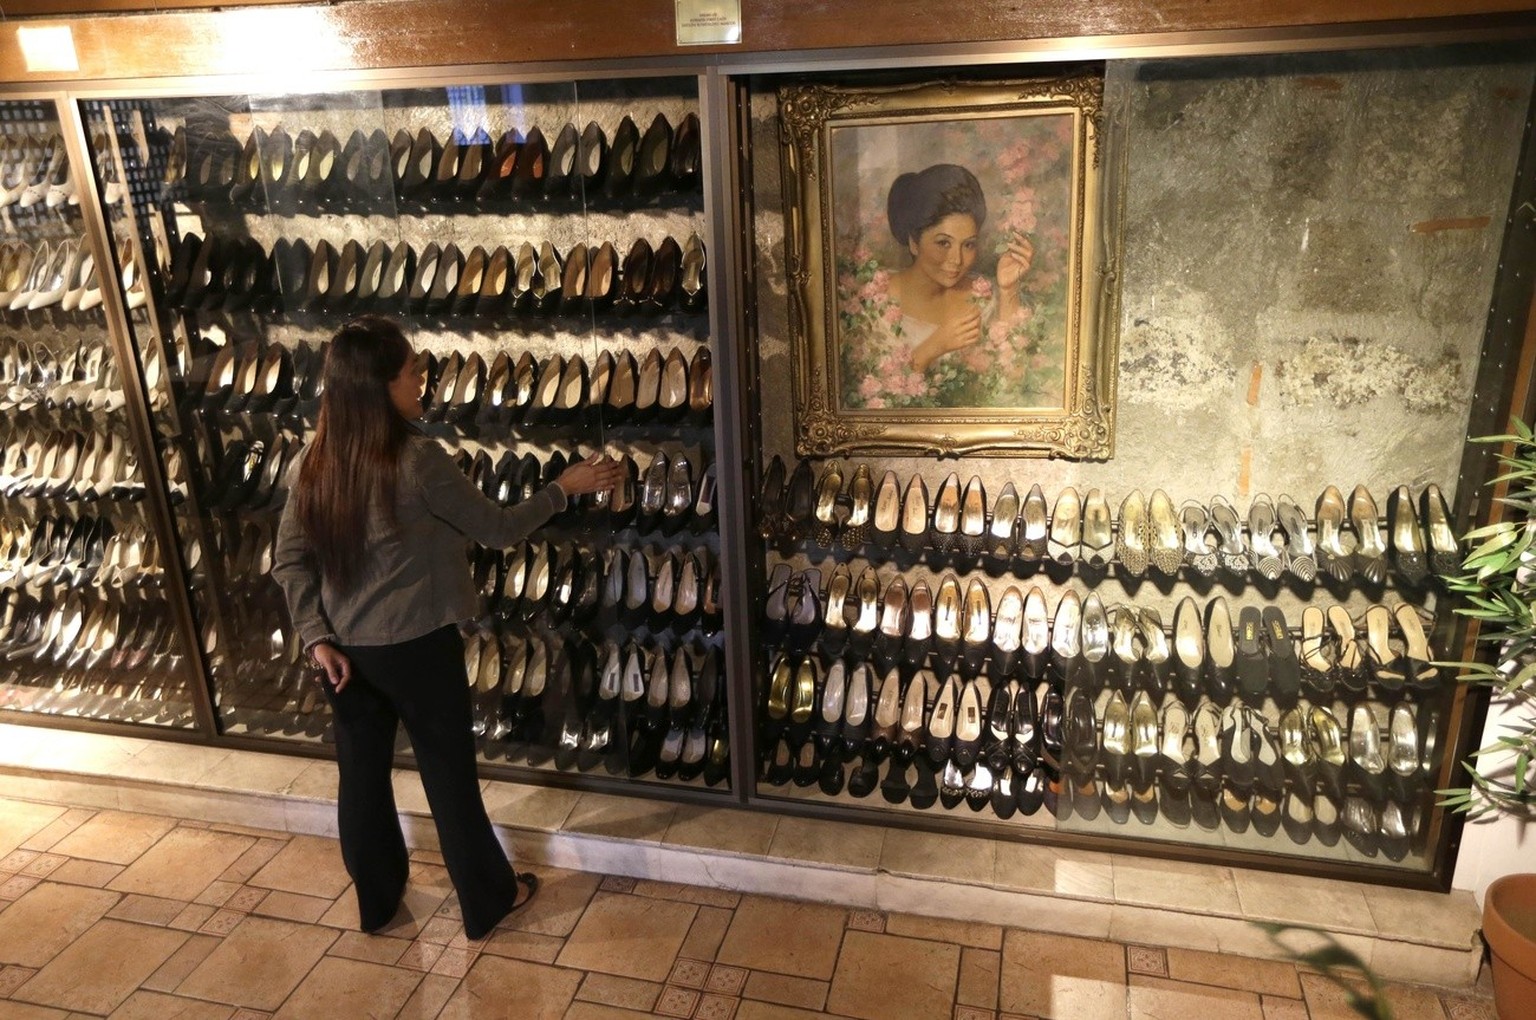 Jane Ballesteros, the curator of Marikina Museum where more than 700 pairs of shoes of former Philippine First Lady Imelda Marcos are displayed, checks a display Tuesday Sept. 25, 2012 at Marikina cit ...